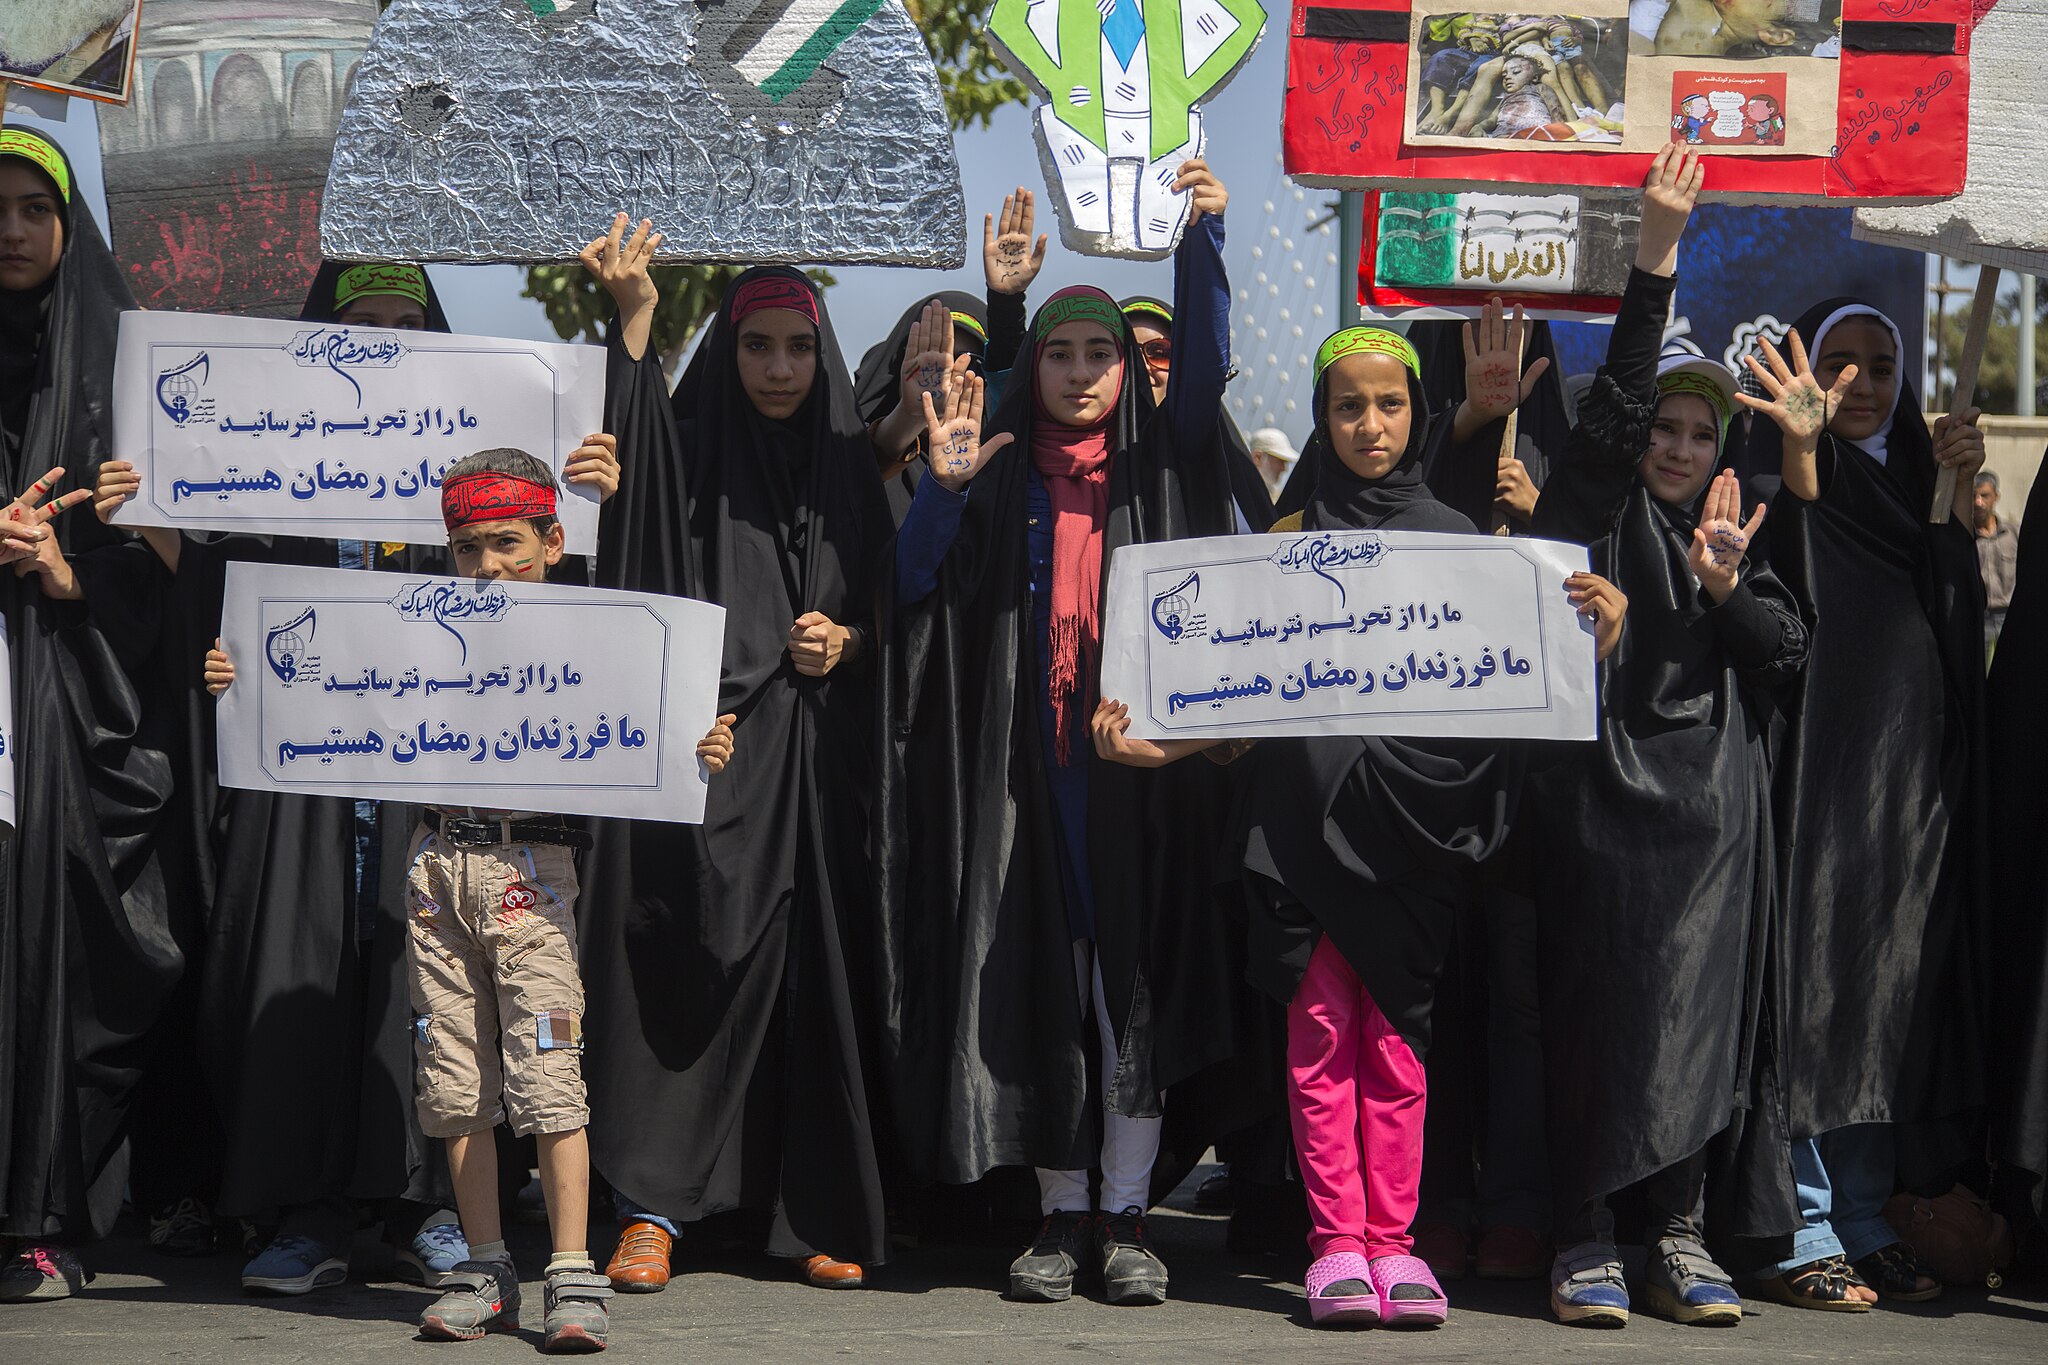 Protesters in Iran on Quds Day in 2015, a pro-Palestinian event on the last Friday of Ramadan  